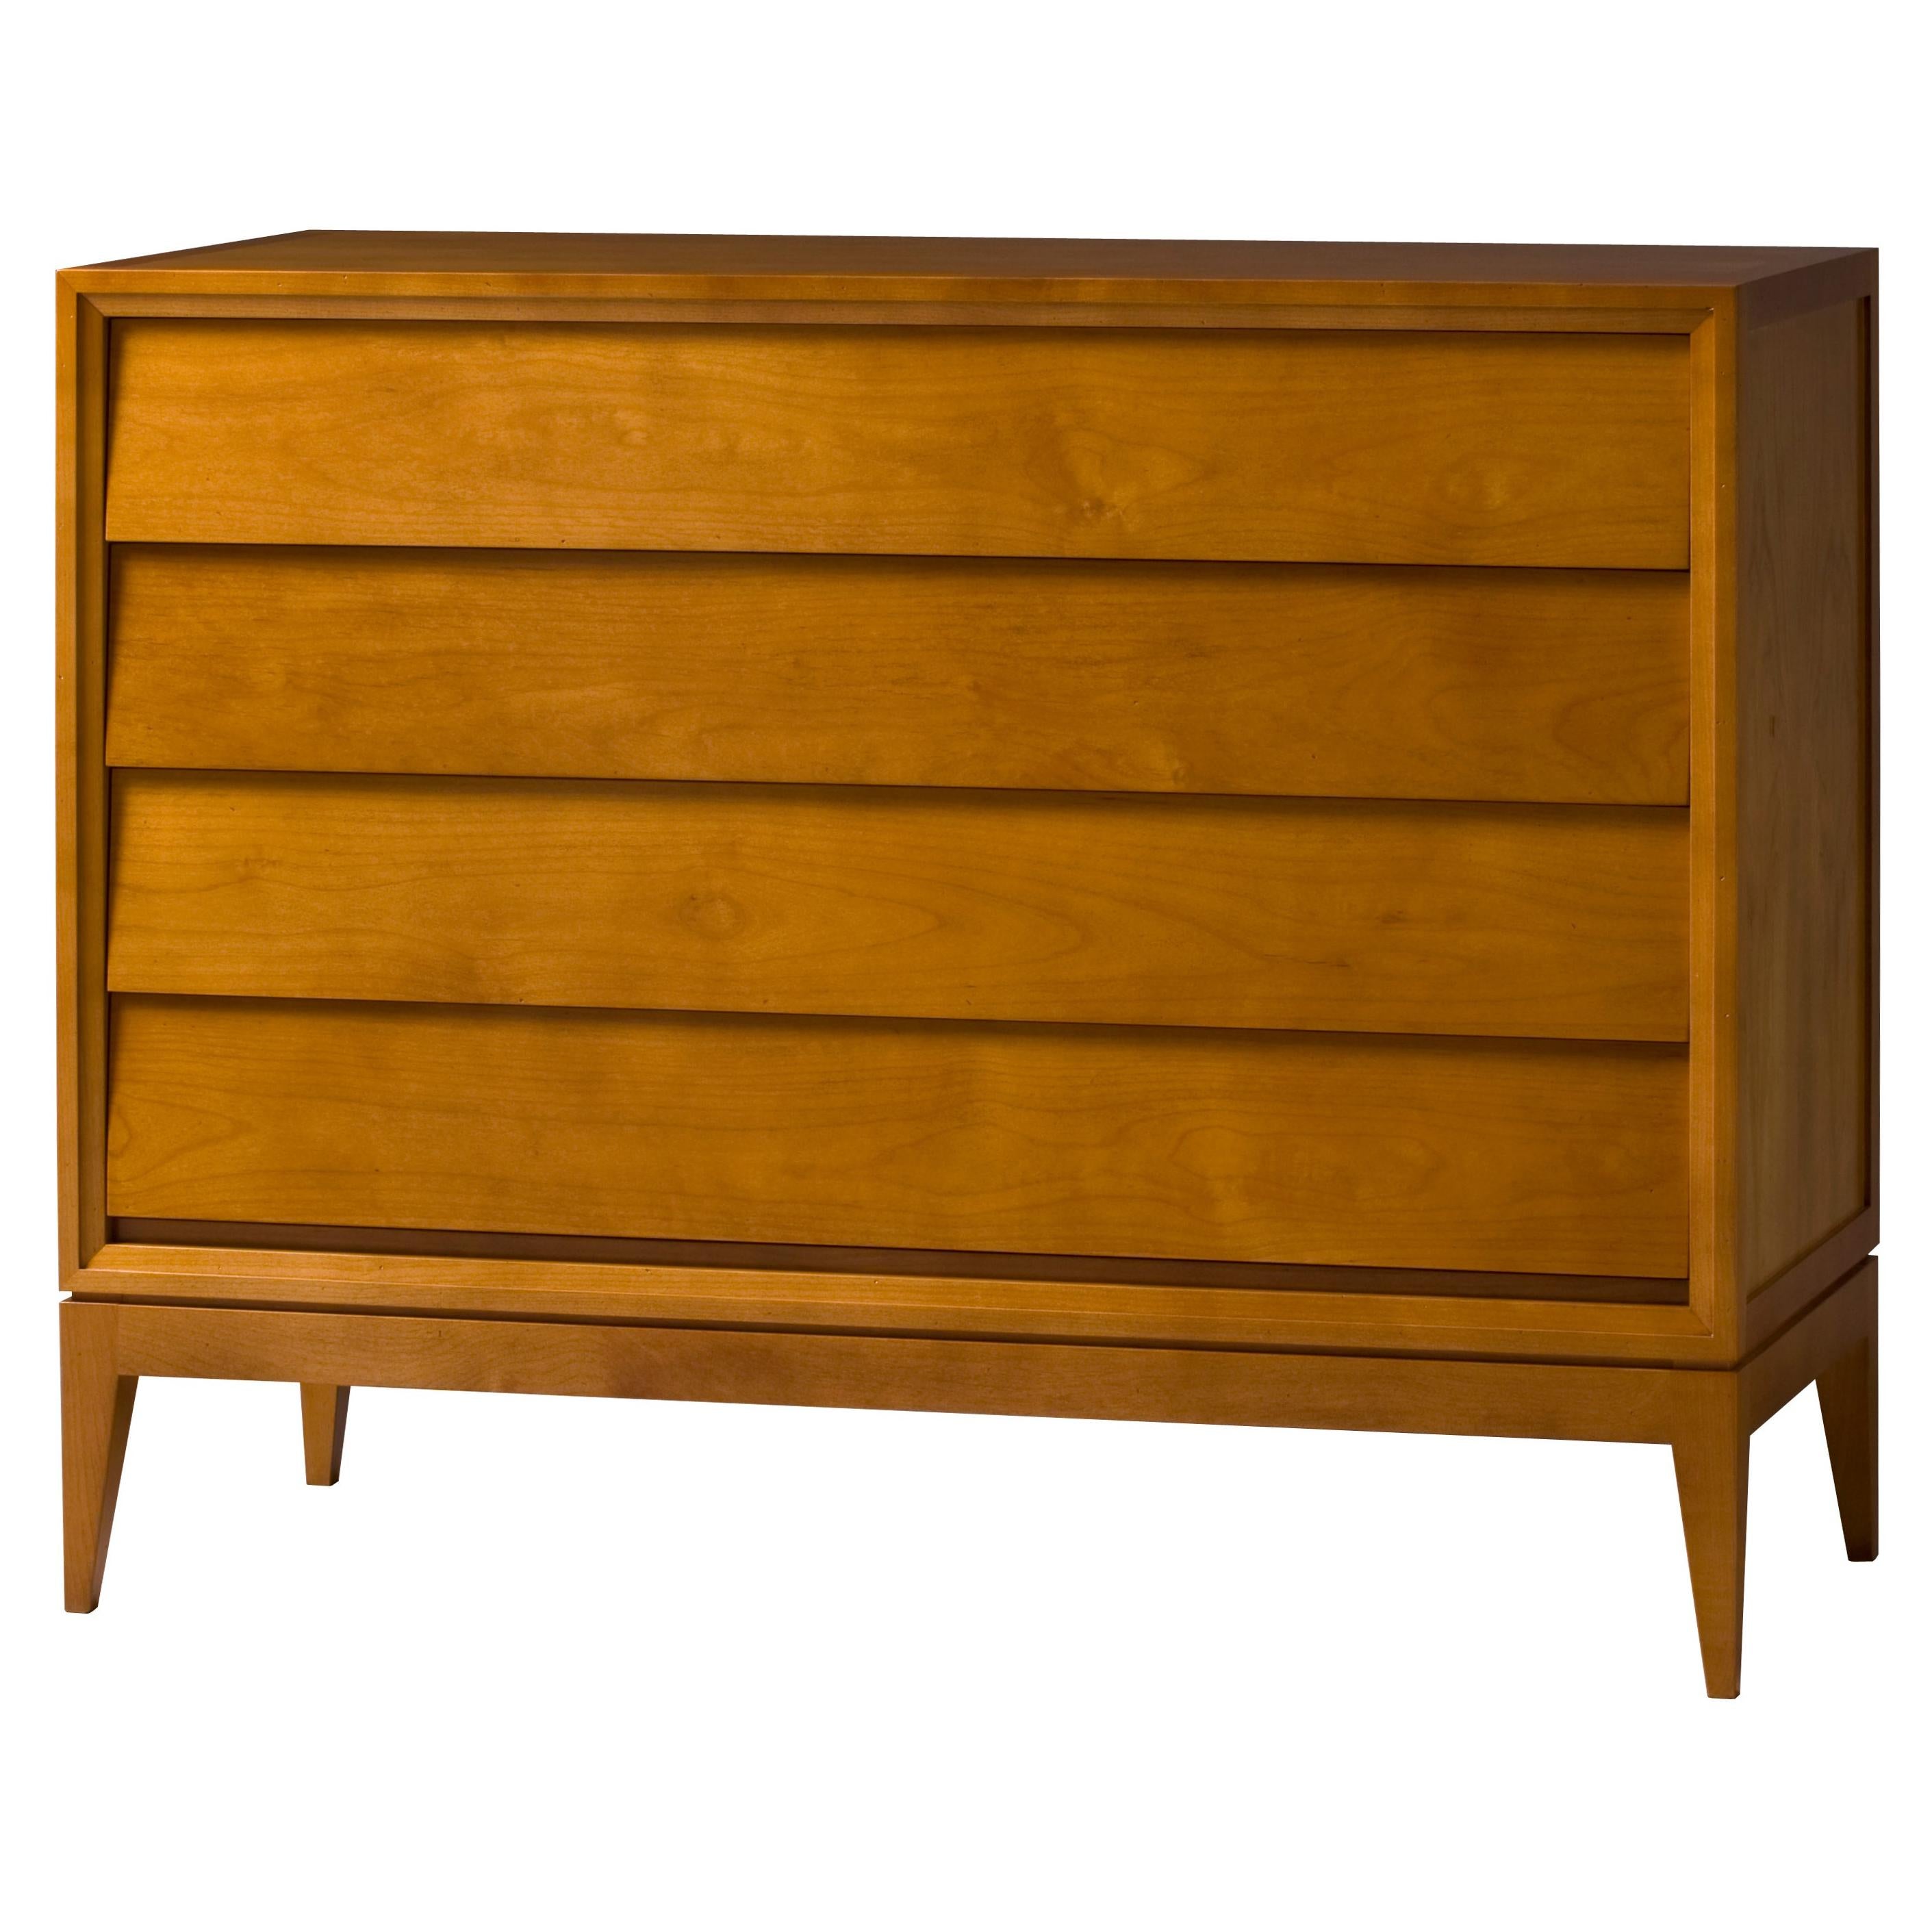 New York, Mid Century Style Wooden Chest of Drawers, by Morelato For Sale